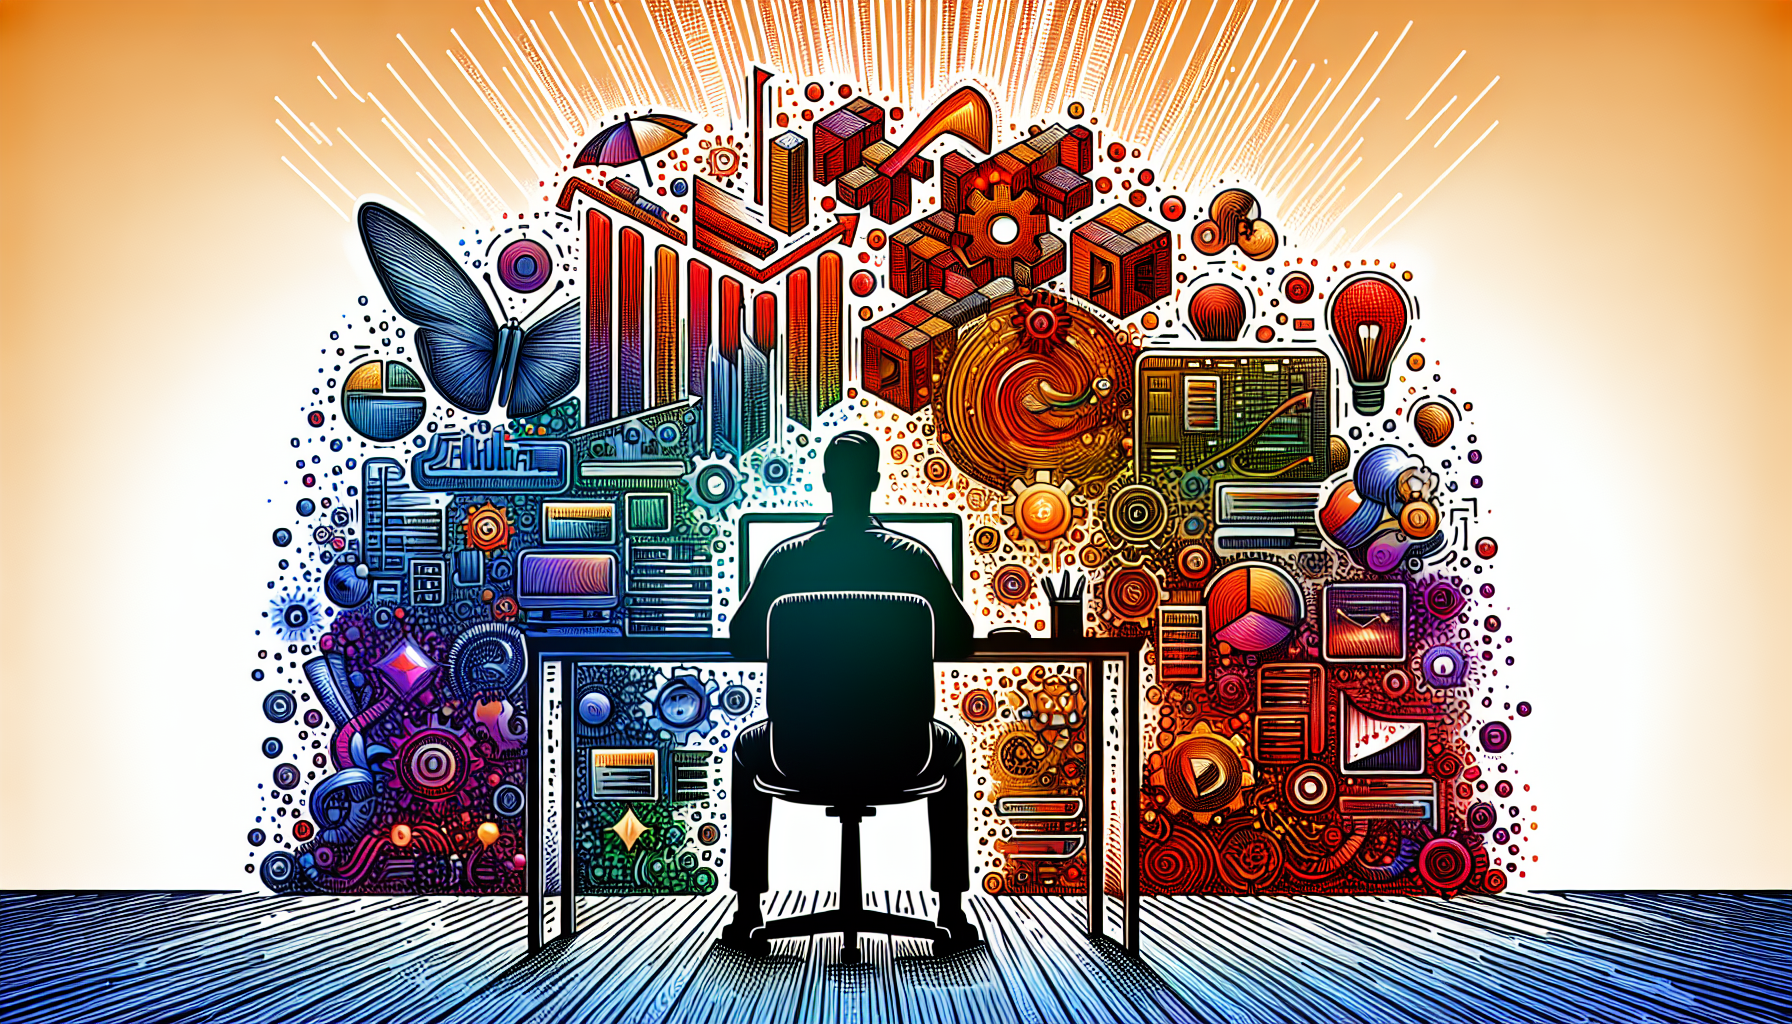 Create an image that depicts an engineer at a desk, surrounded by symbols representing software scal